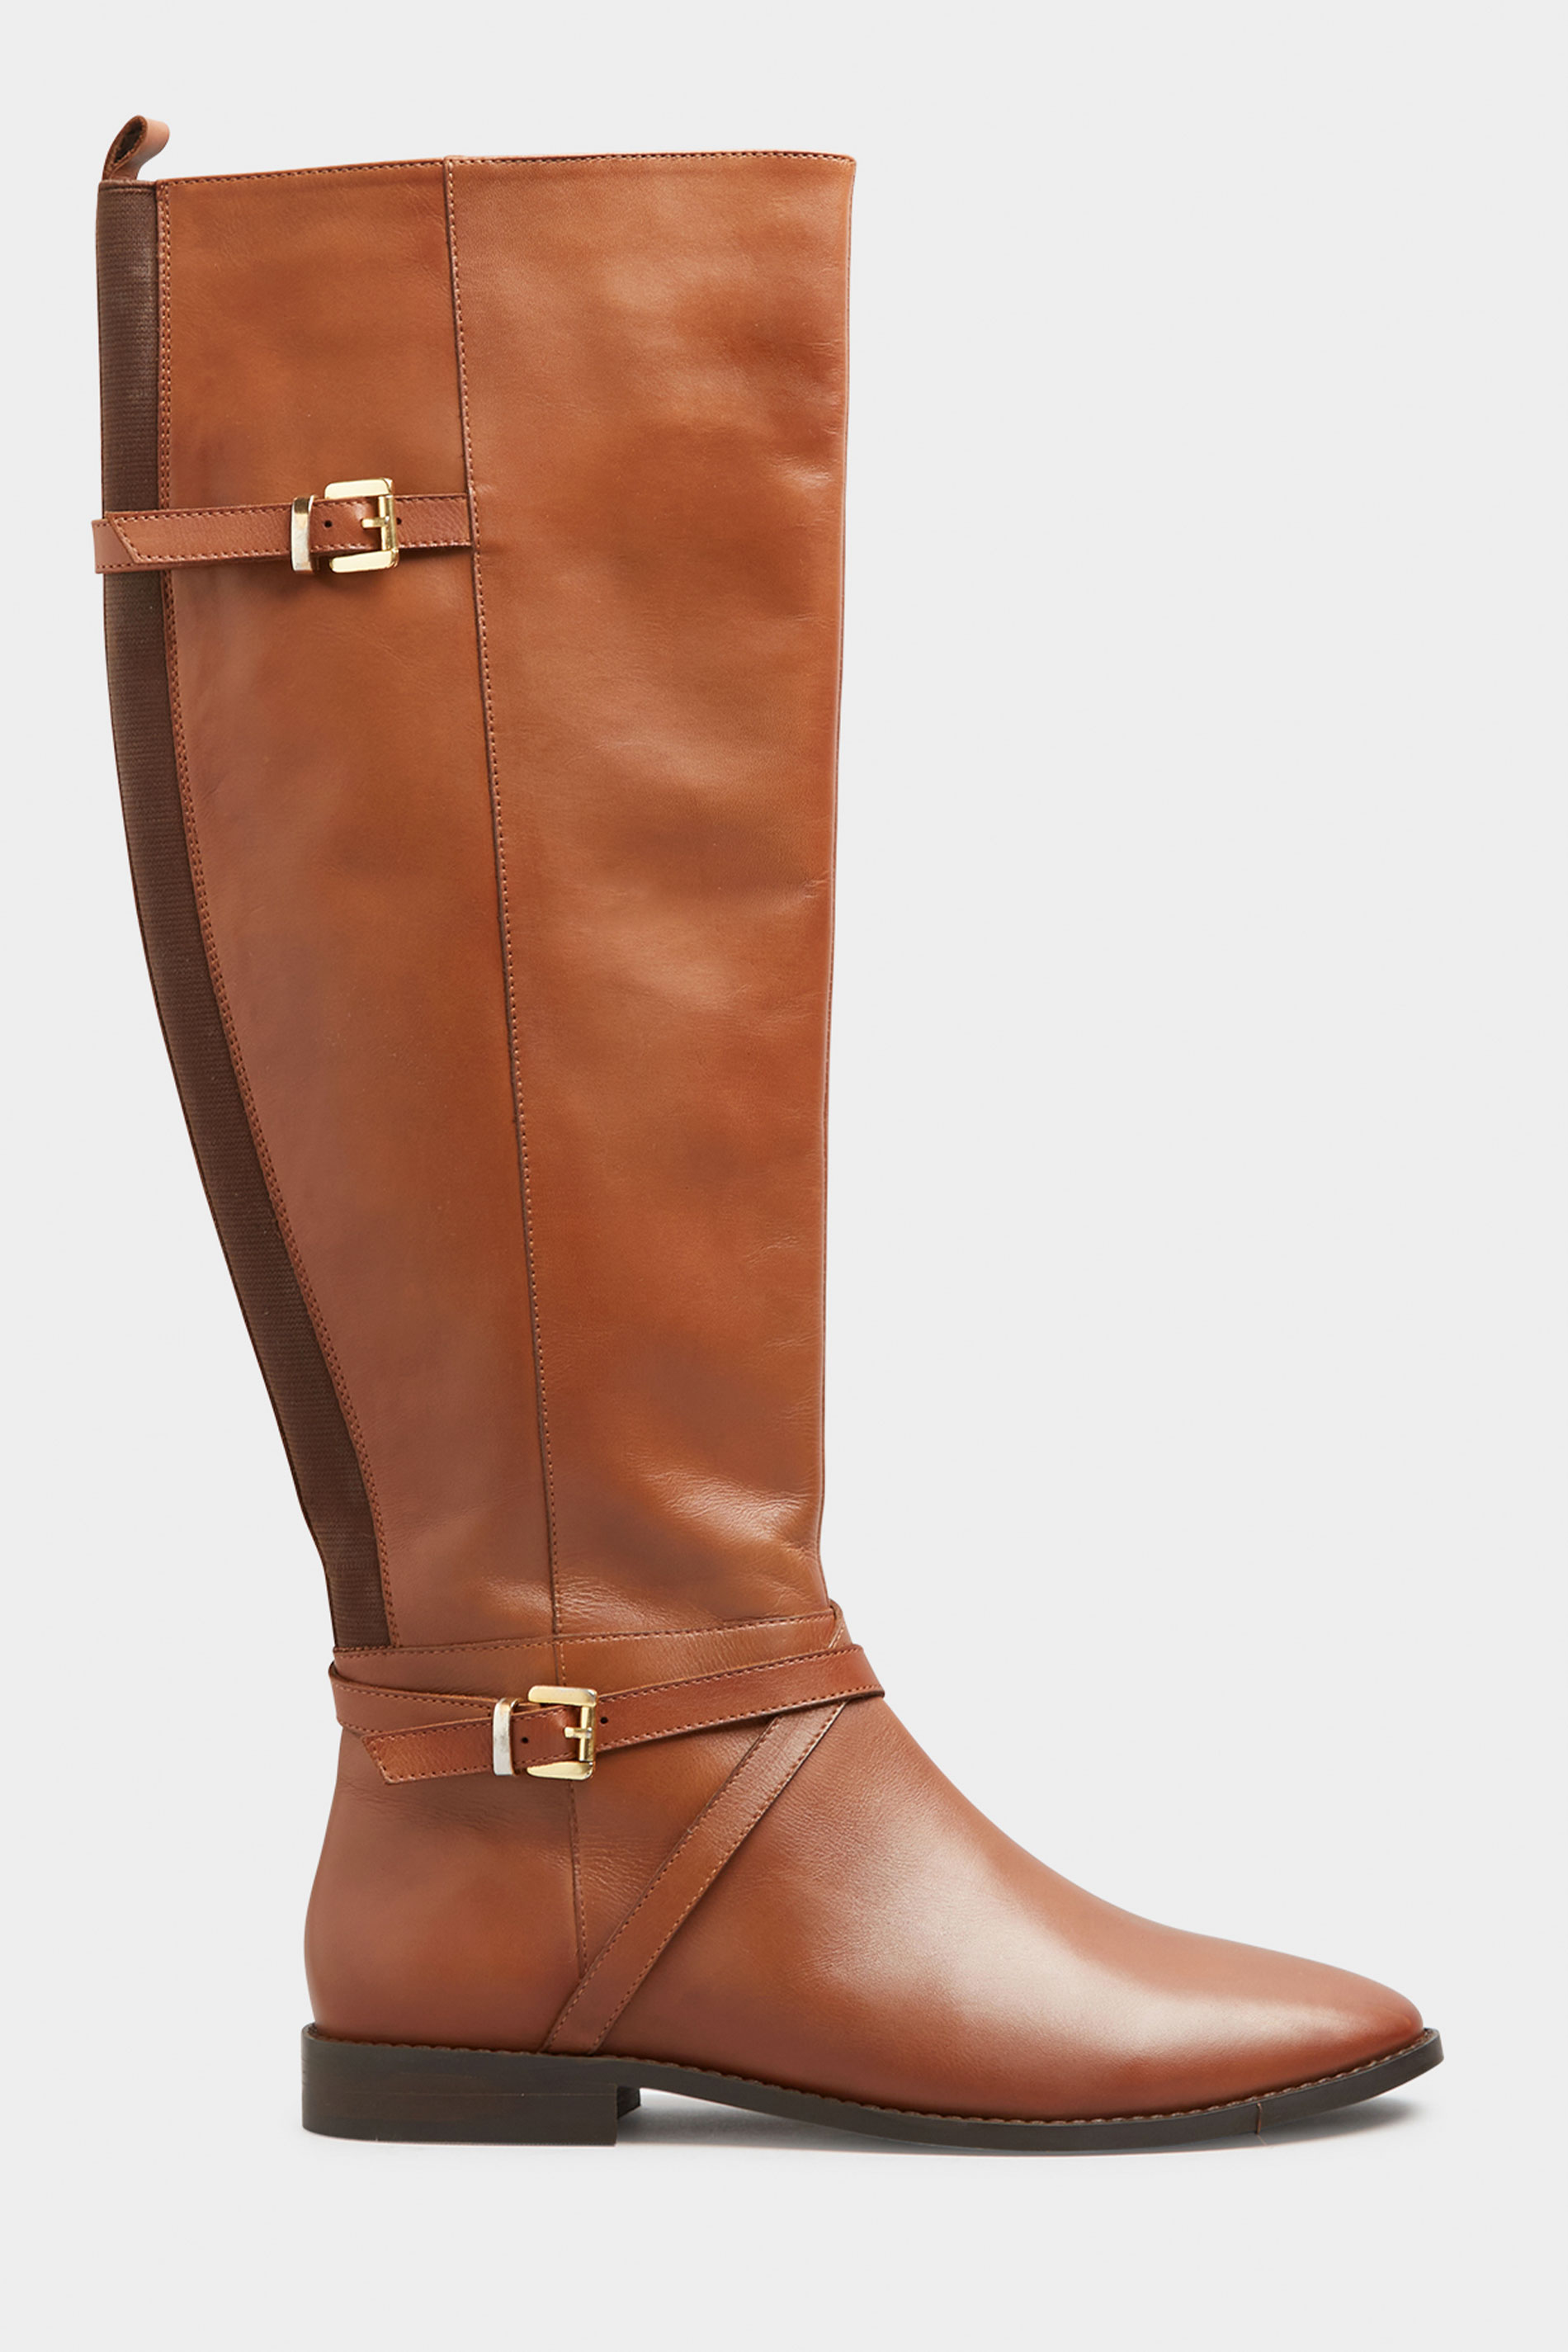 LTS Tan Brown Leather Riding Boots | Long Tall Sally 2